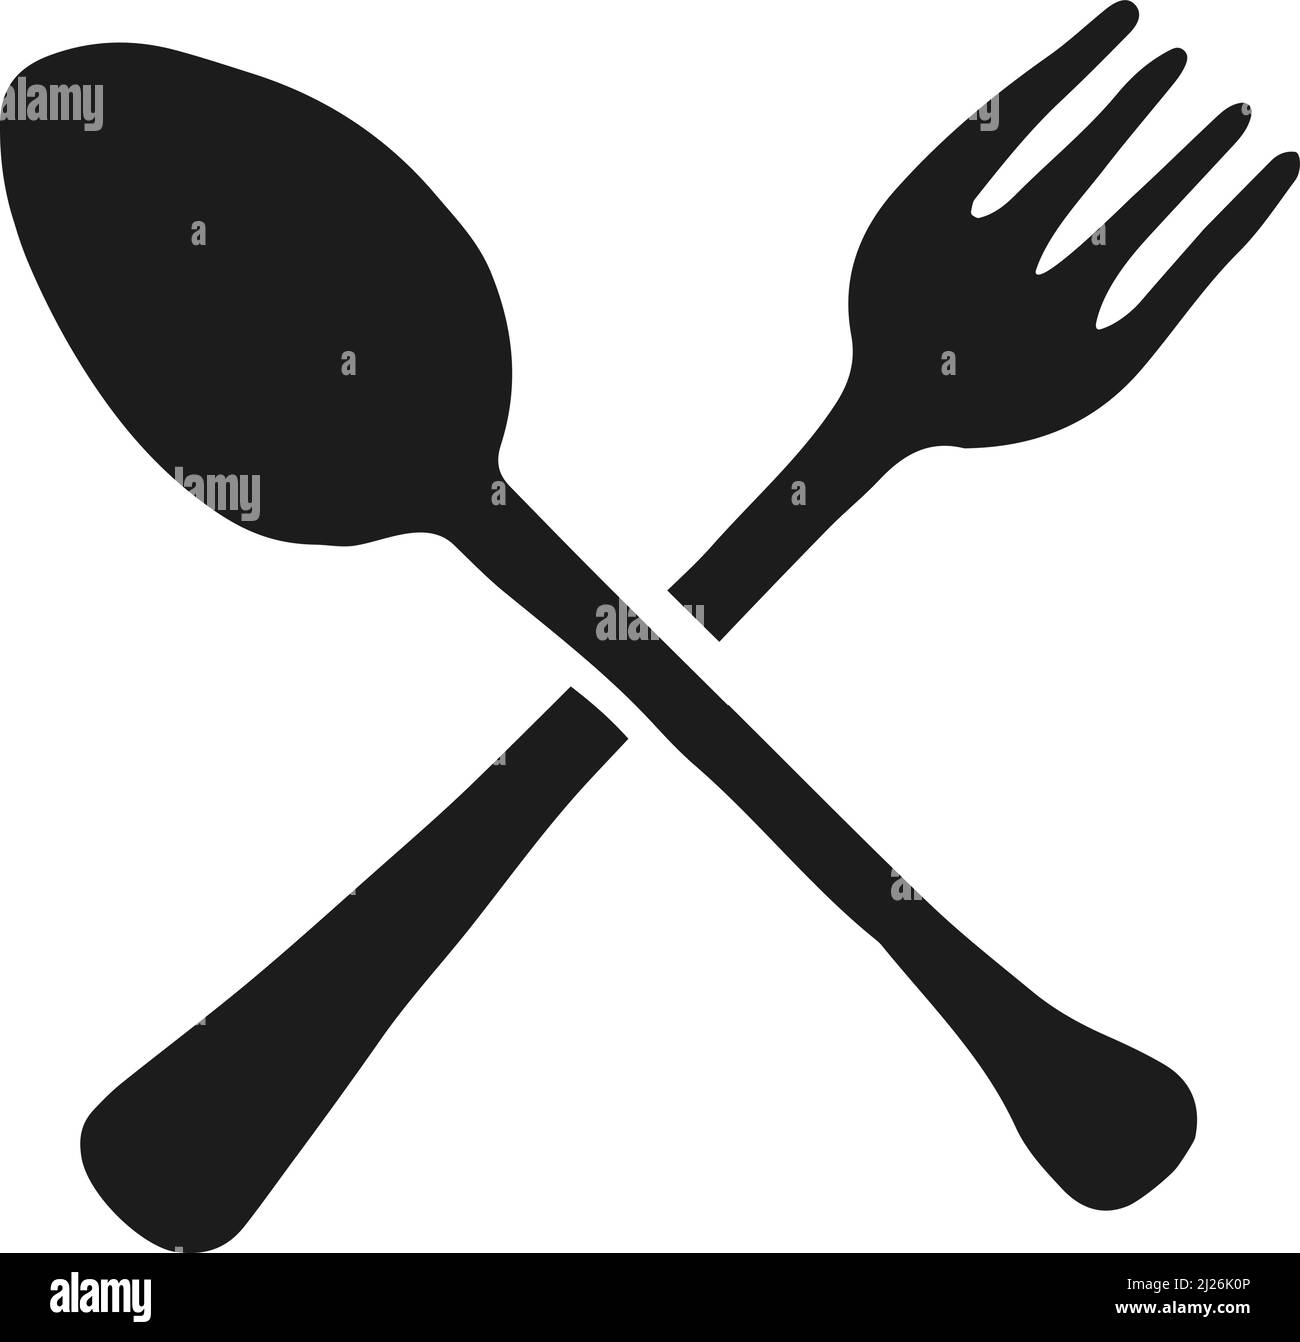 Crossed spoon and fork black silhouettes. Cutlery symbol Stock Vector